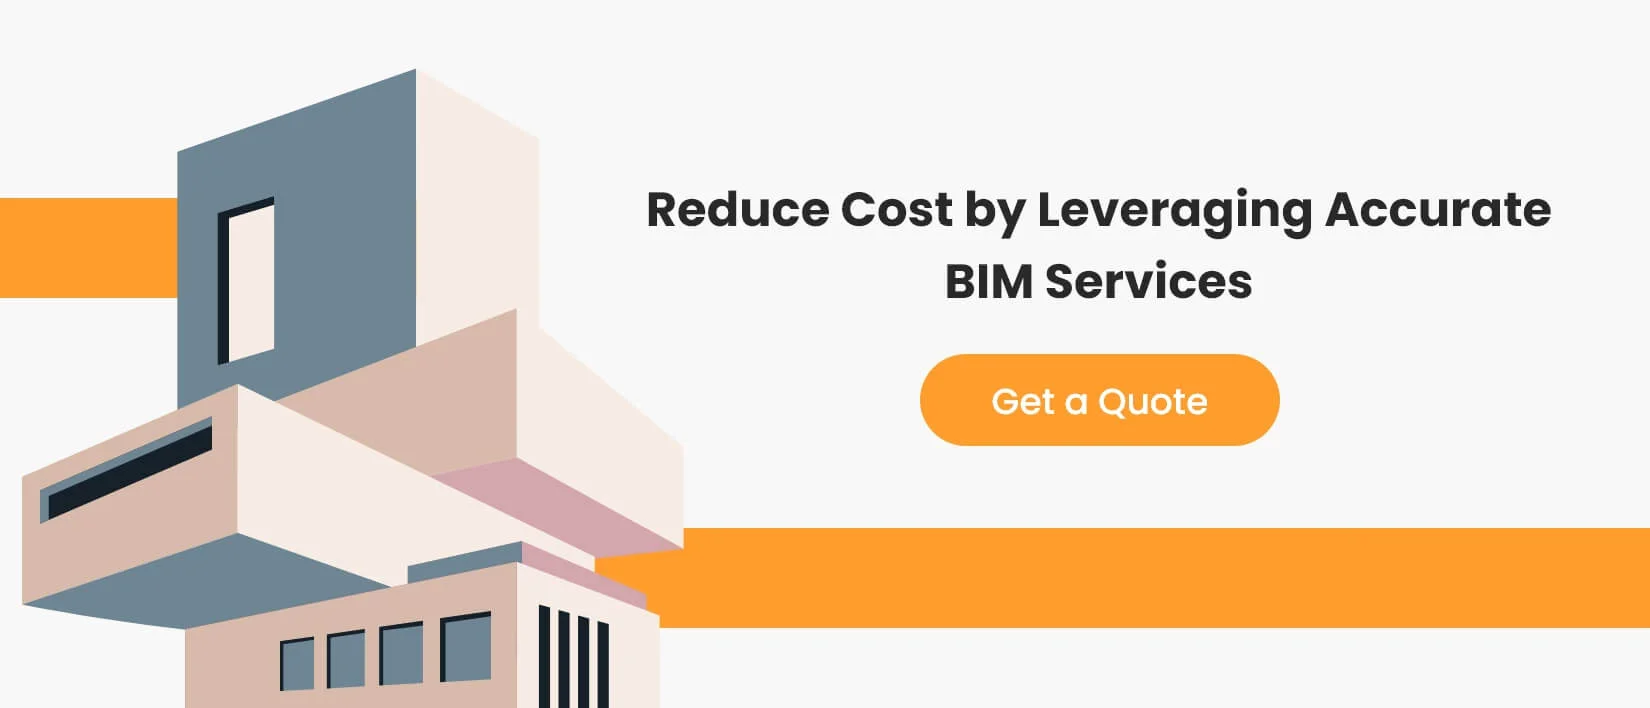 Reduce Cost by Leveraging Accurate BIM Services